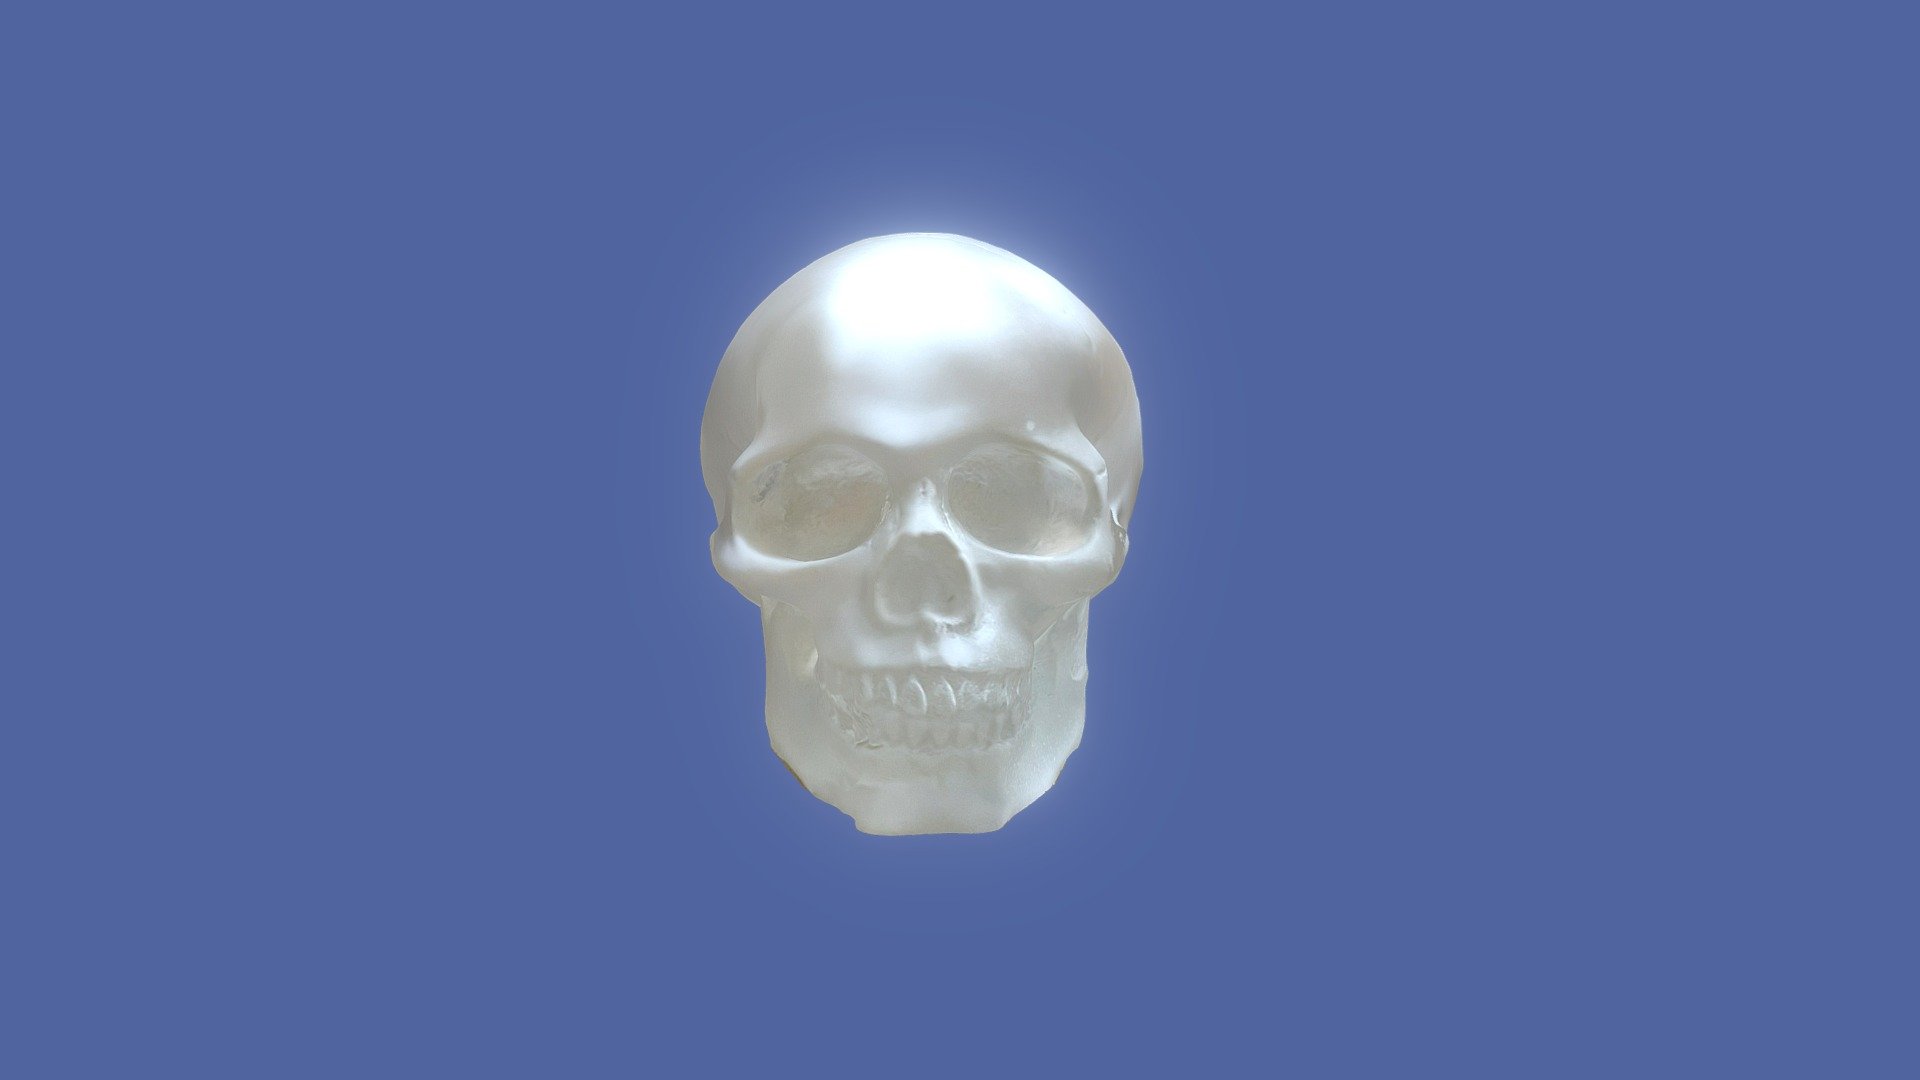 Glass skull coated with dry shampoo. The uneven coating of powder made an interesting surface. Scanned with Trnio plus in ARKit mode on an iphone 13 pro. Cropped in Meshmixer 3d model